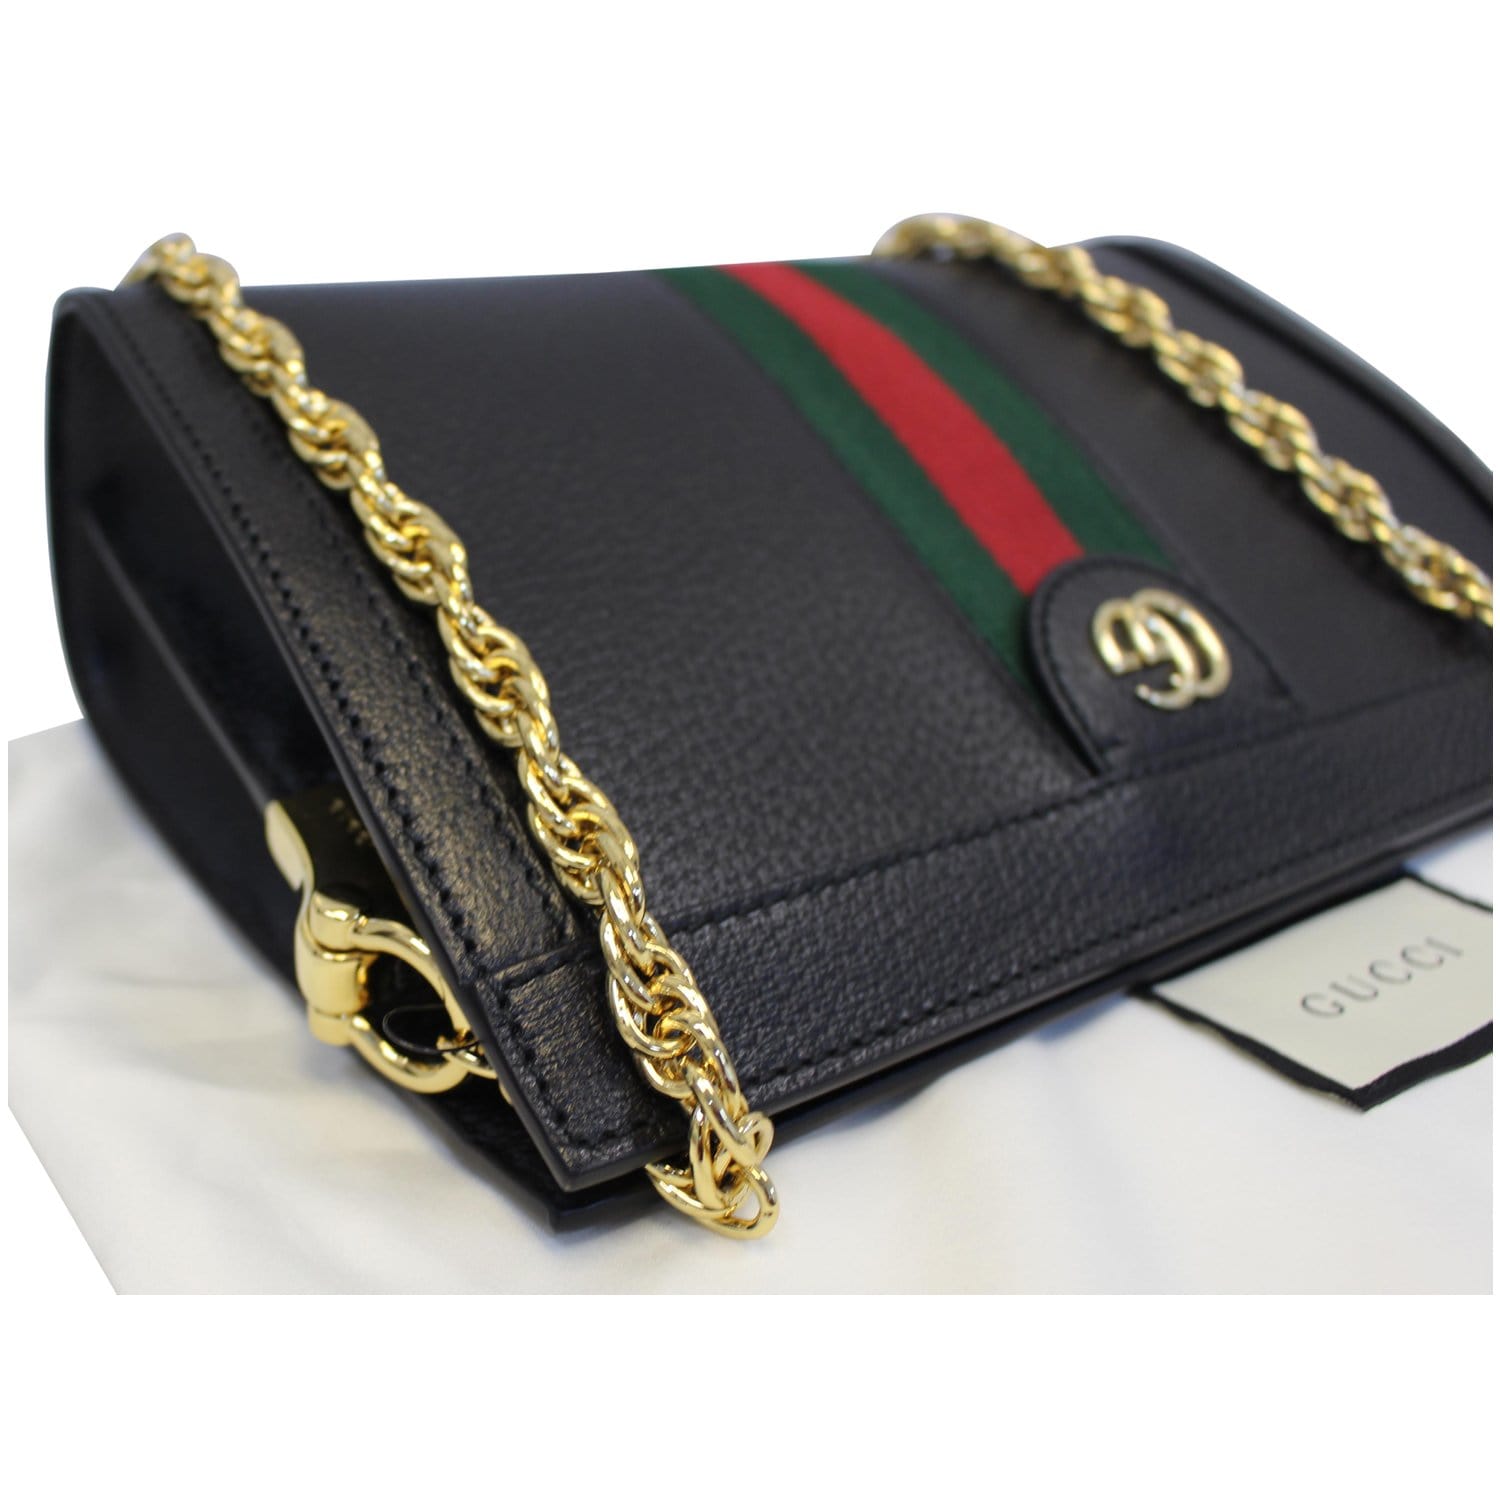 Authentic Gucci calfskin GG web small Ophidia chain shoulder bag